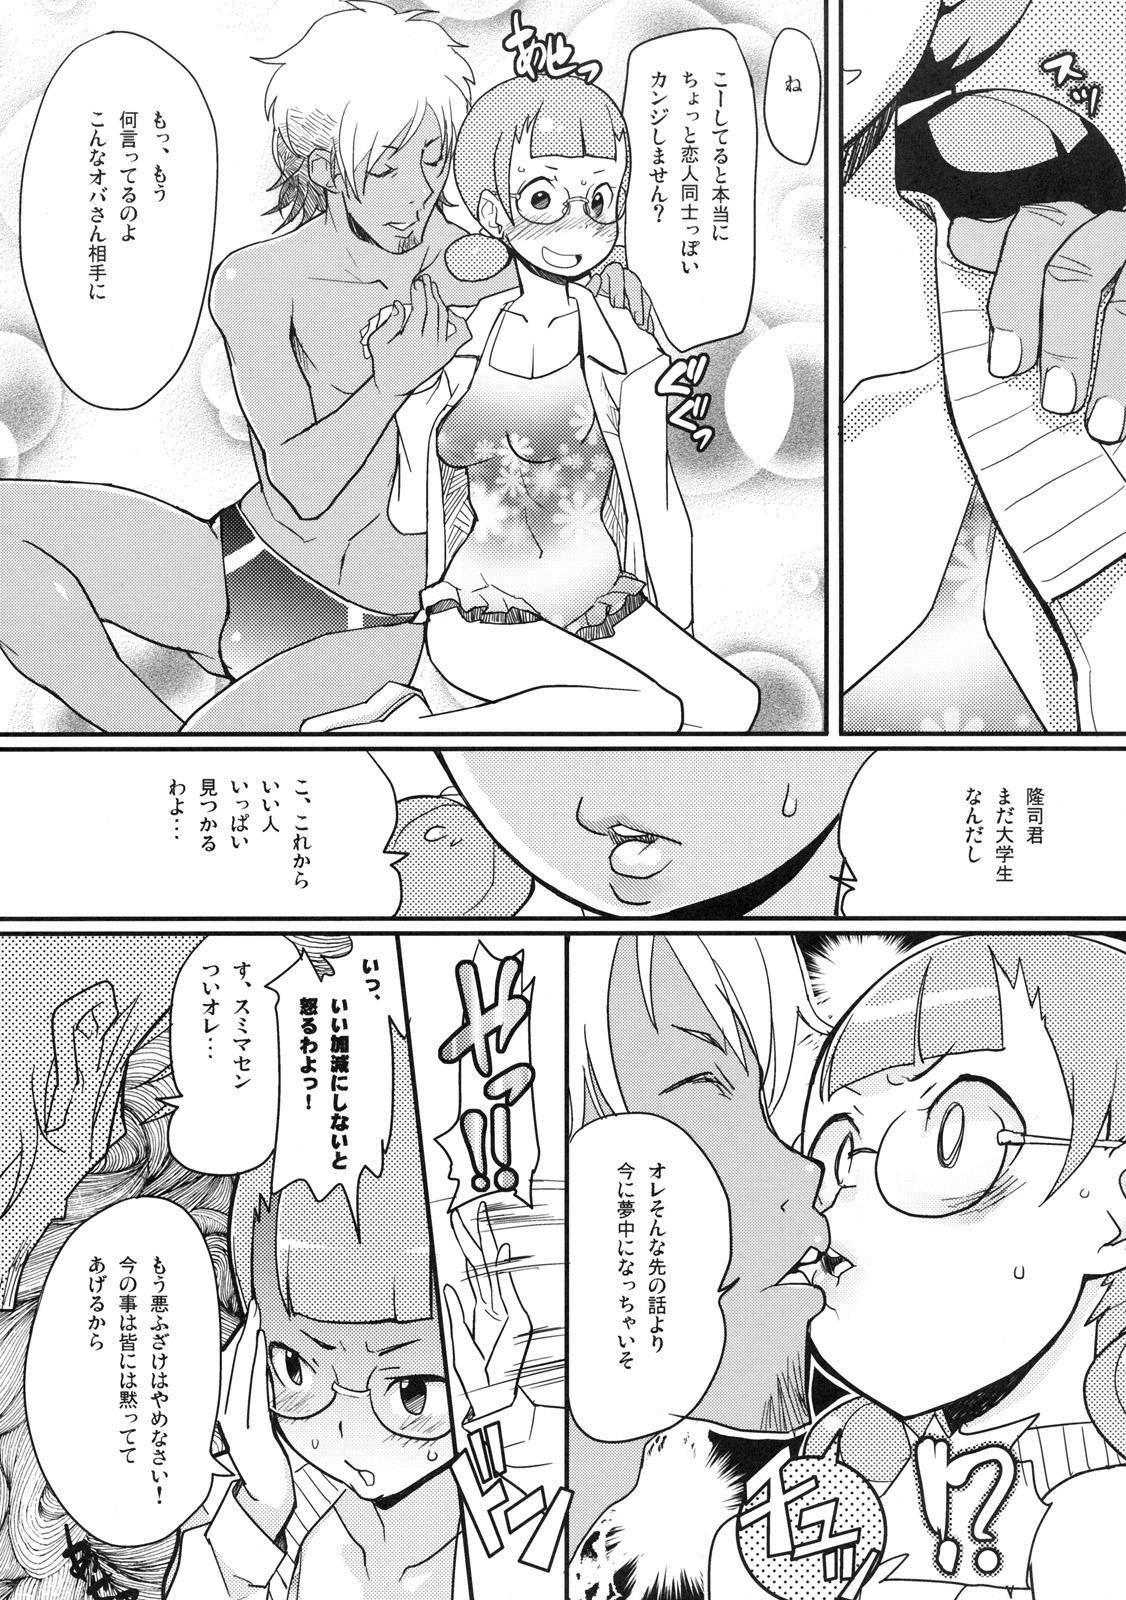 Punish Shinzui EARLY SUMMER ver. Vol. 3 Best Blow Job Ever - Page 8